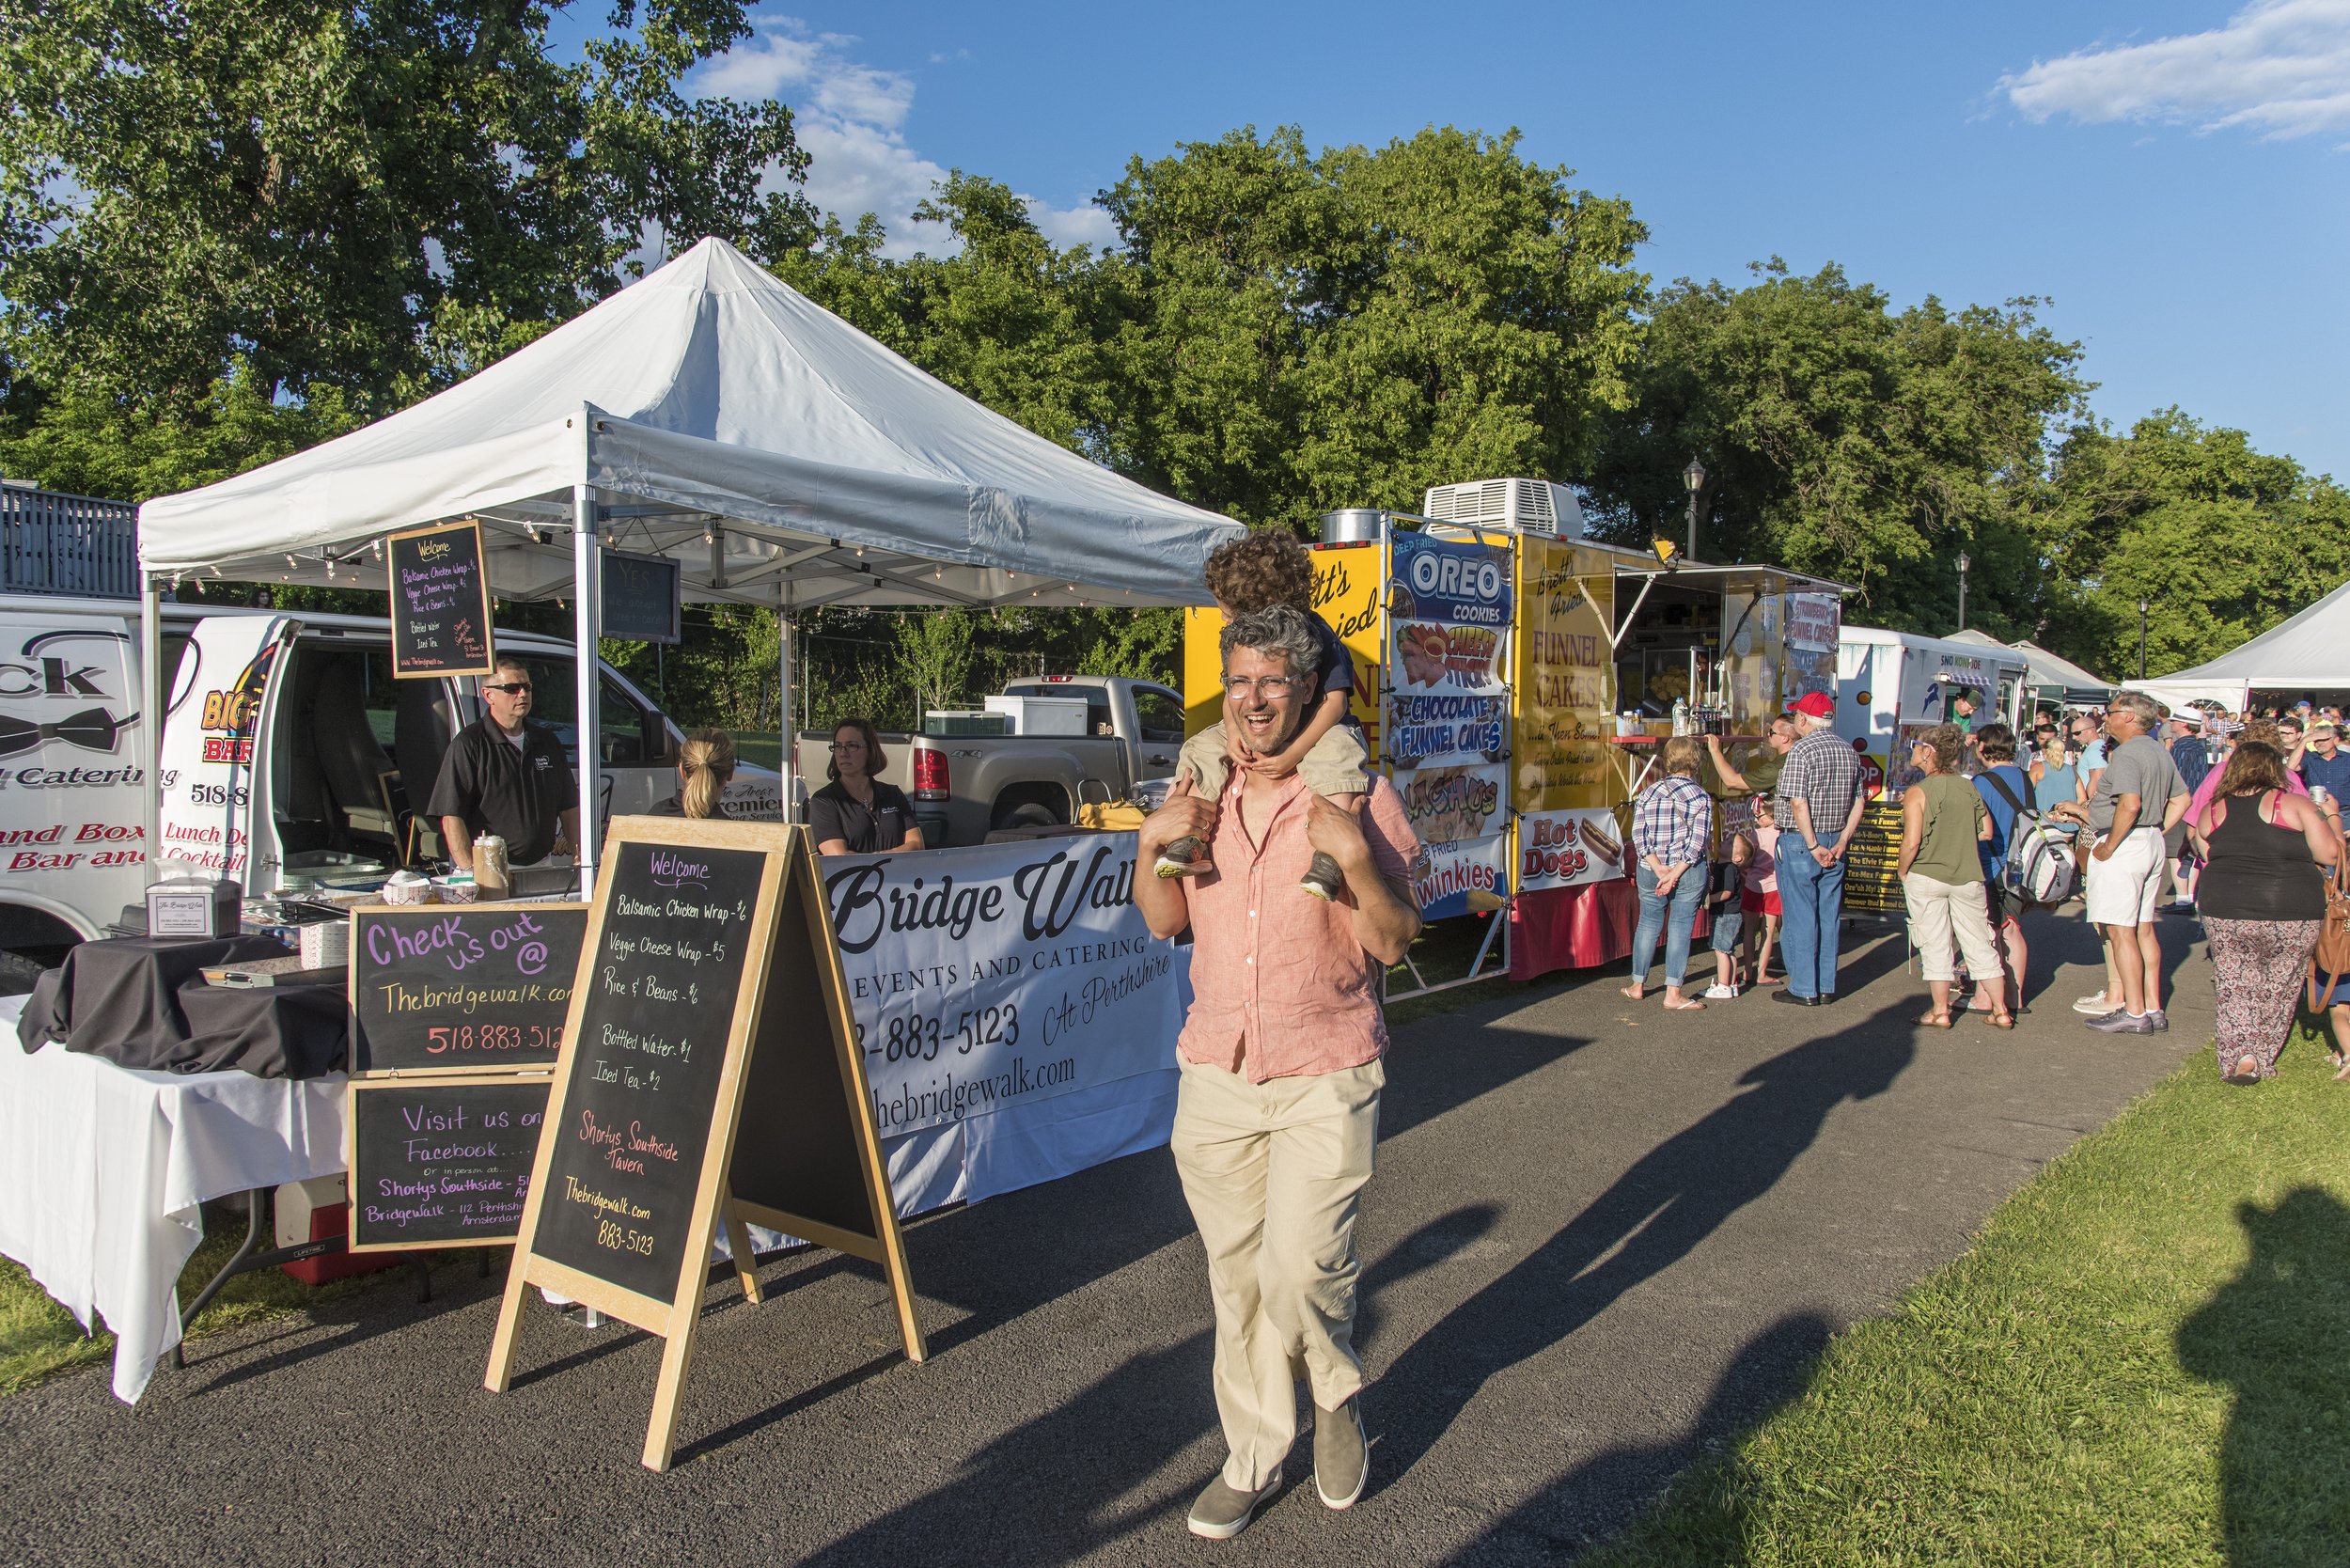  Enjoy a variety of food trucks, vendors, and activities. 